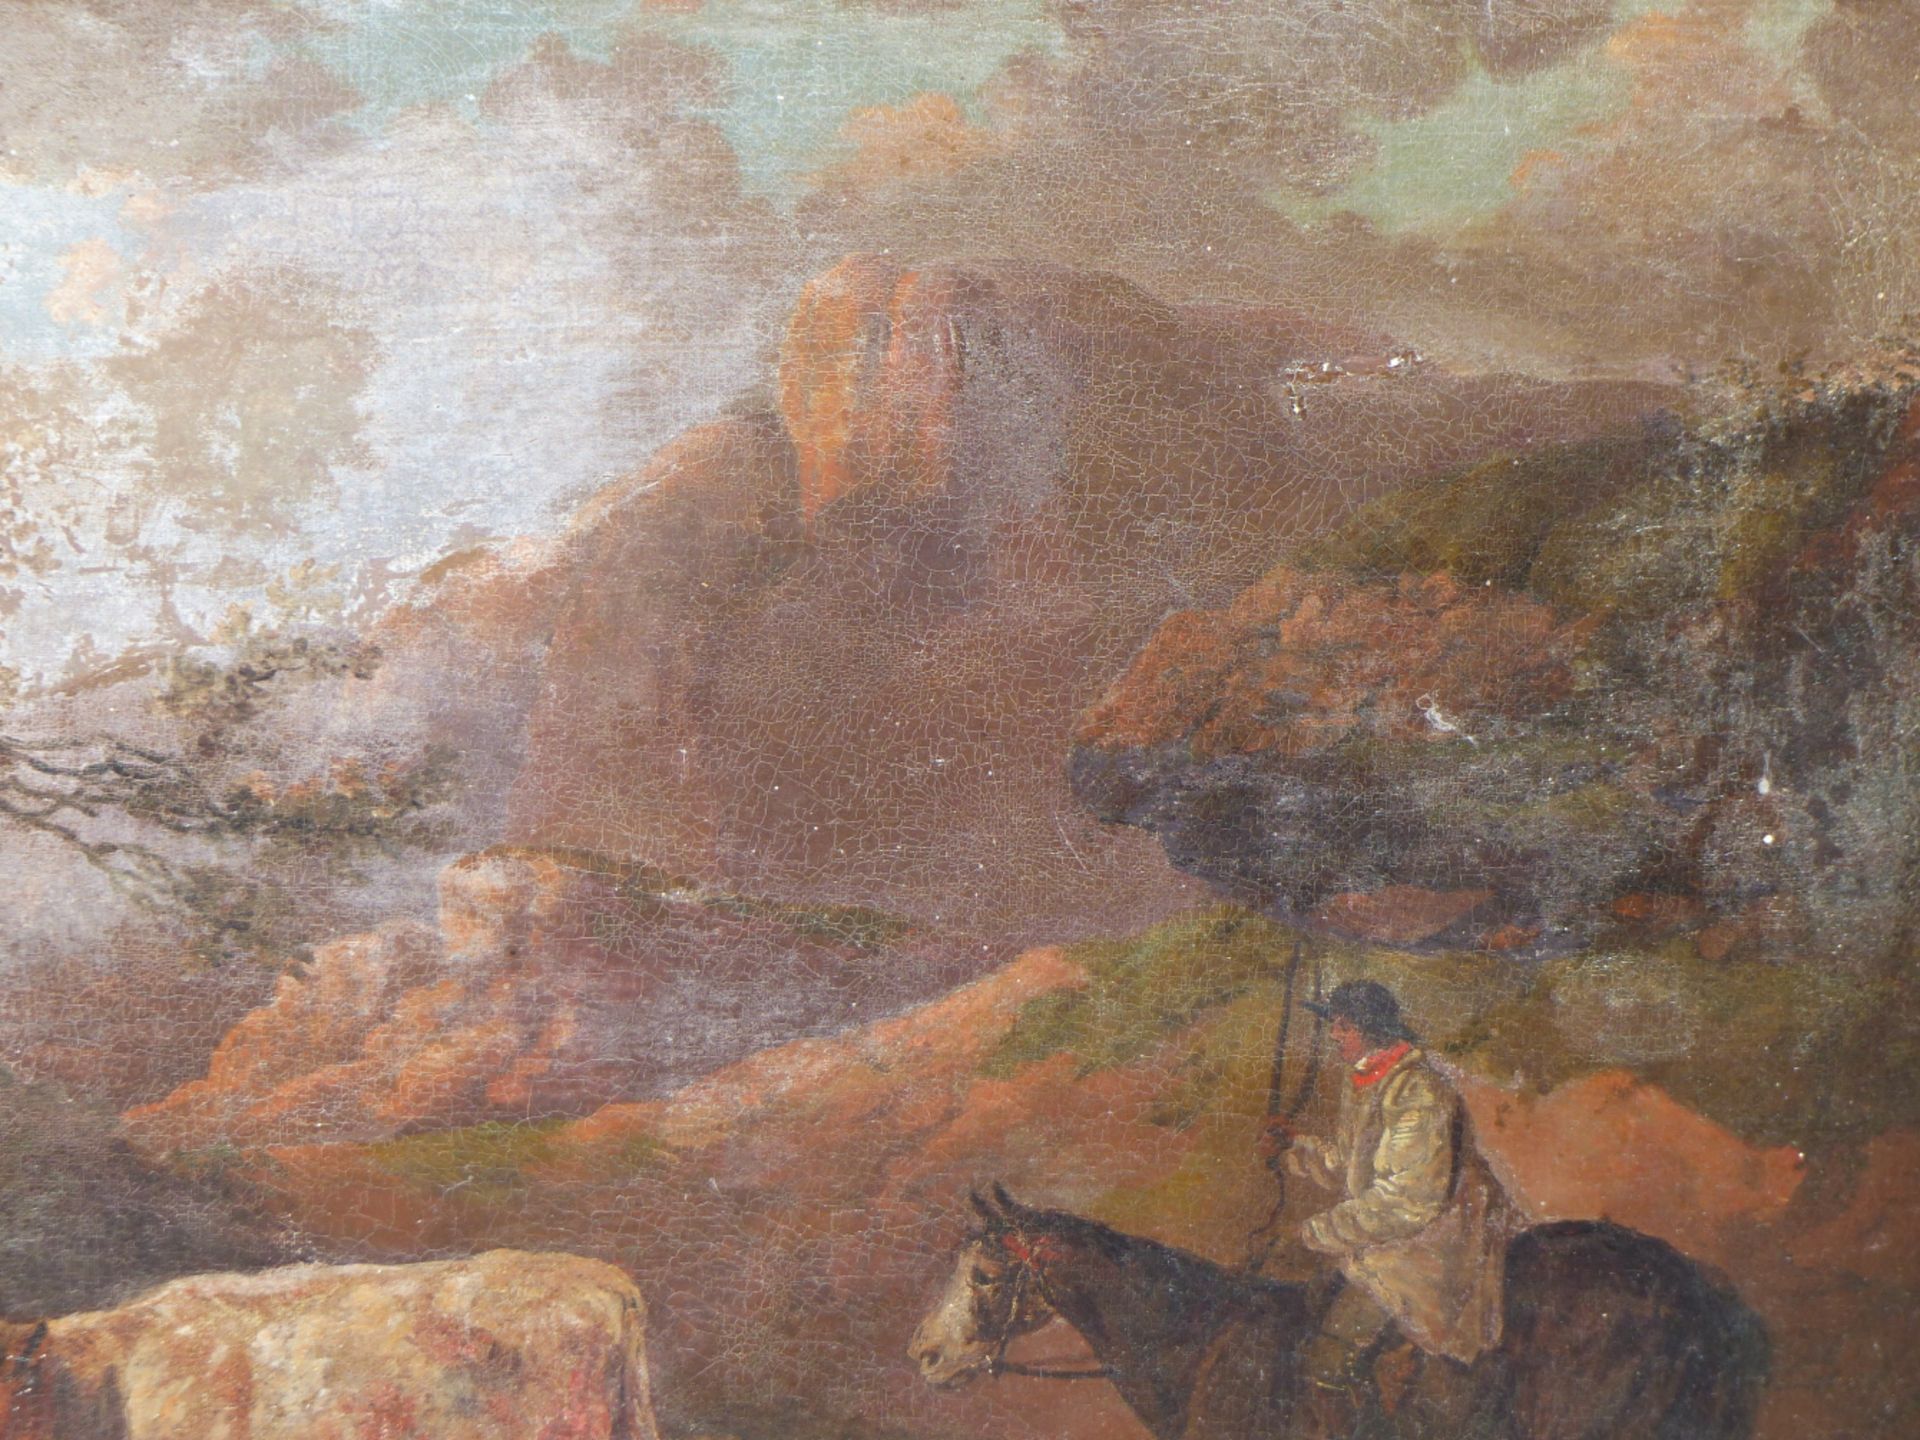 19th C. ENGLISH SCHOOL IN THE MANNER OF GEORGE MORLAND. HERDING THE CATTLE, OIL ON CANVAS. 41 x - Image 9 of 11